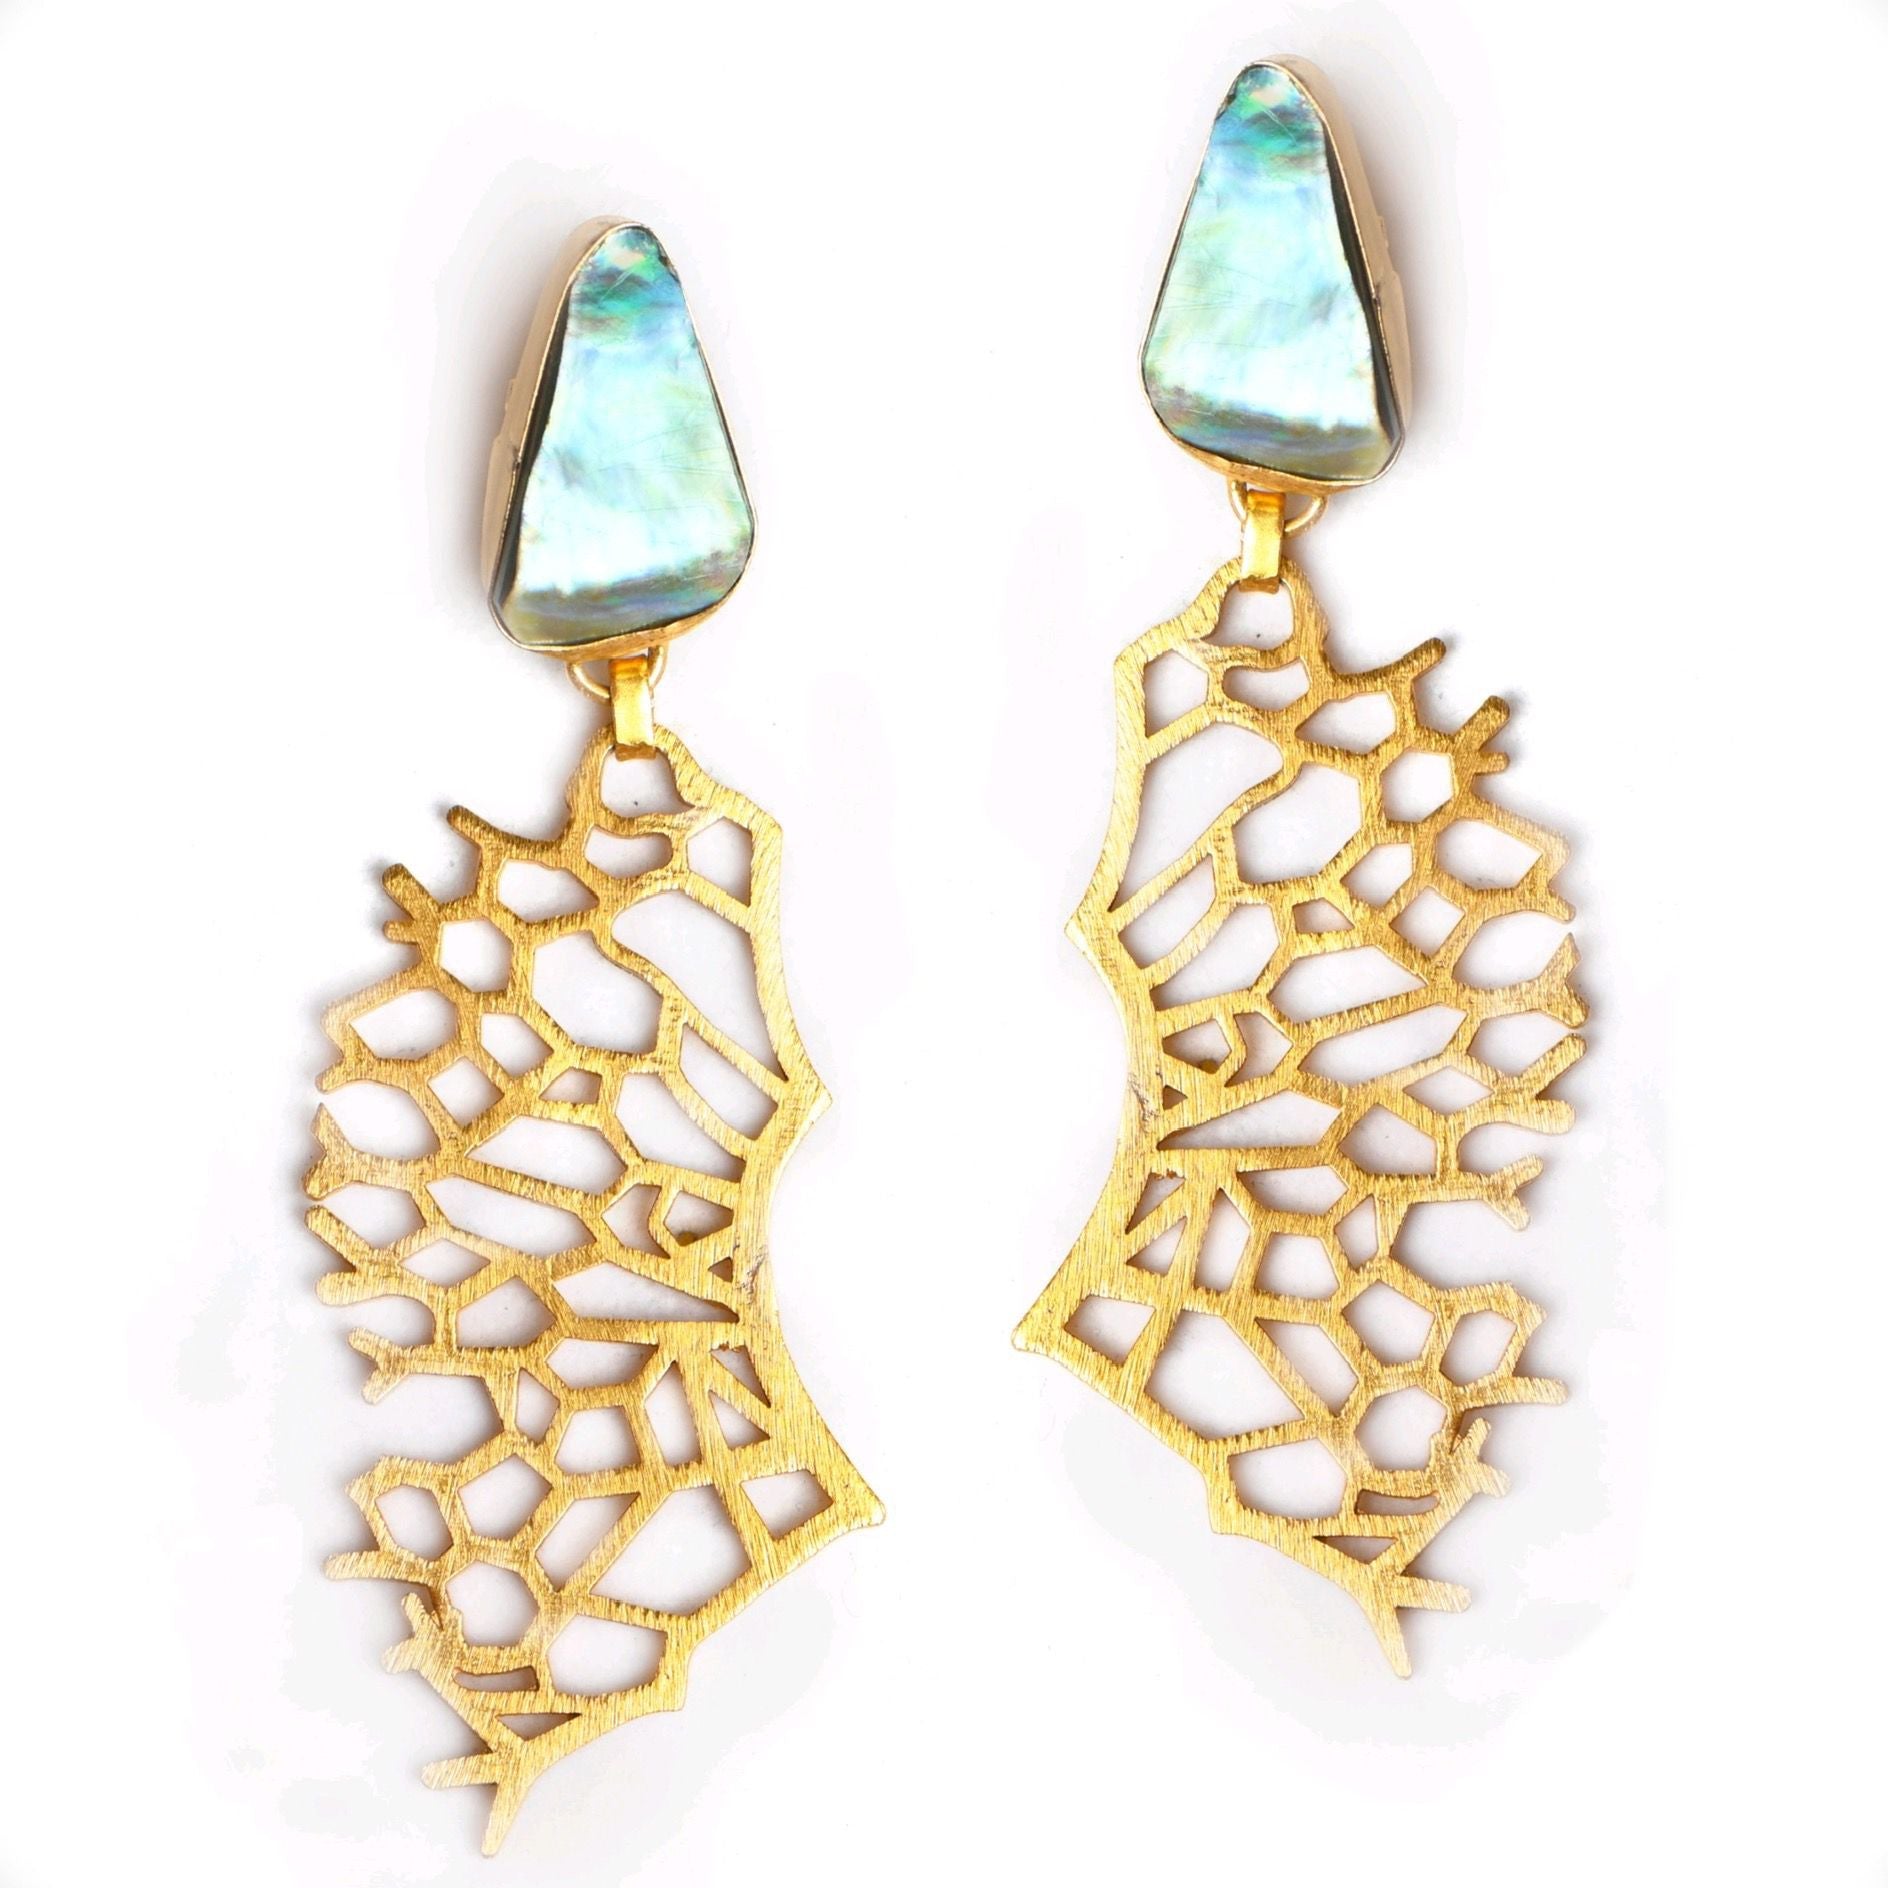 Coral (Abalone Shell) Statement Earrings